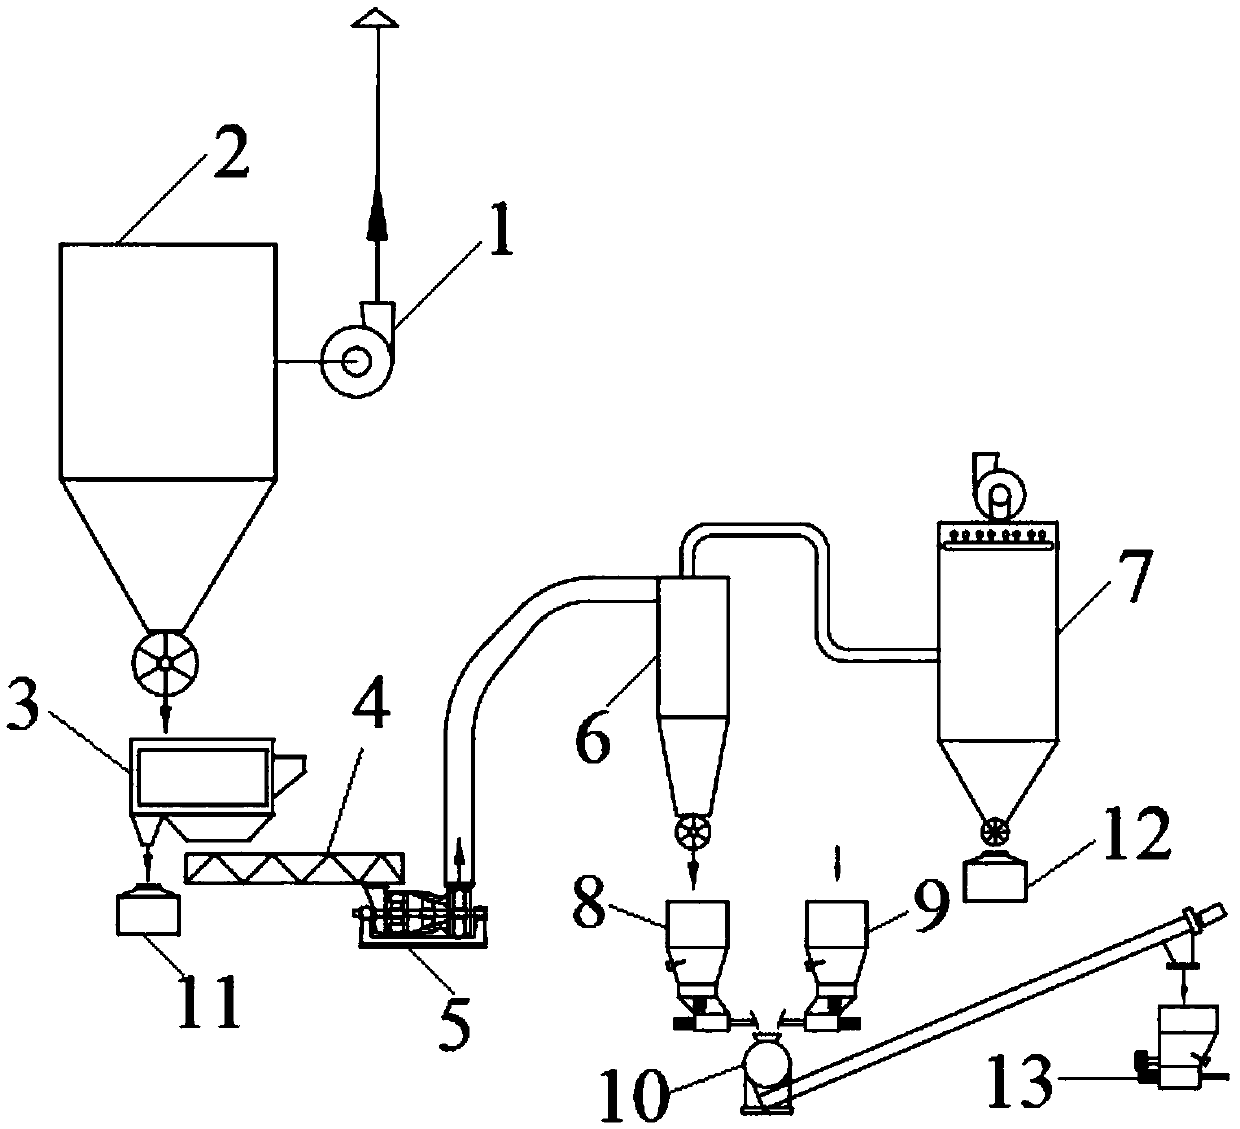 High-efficiency coagulant preparation system and process